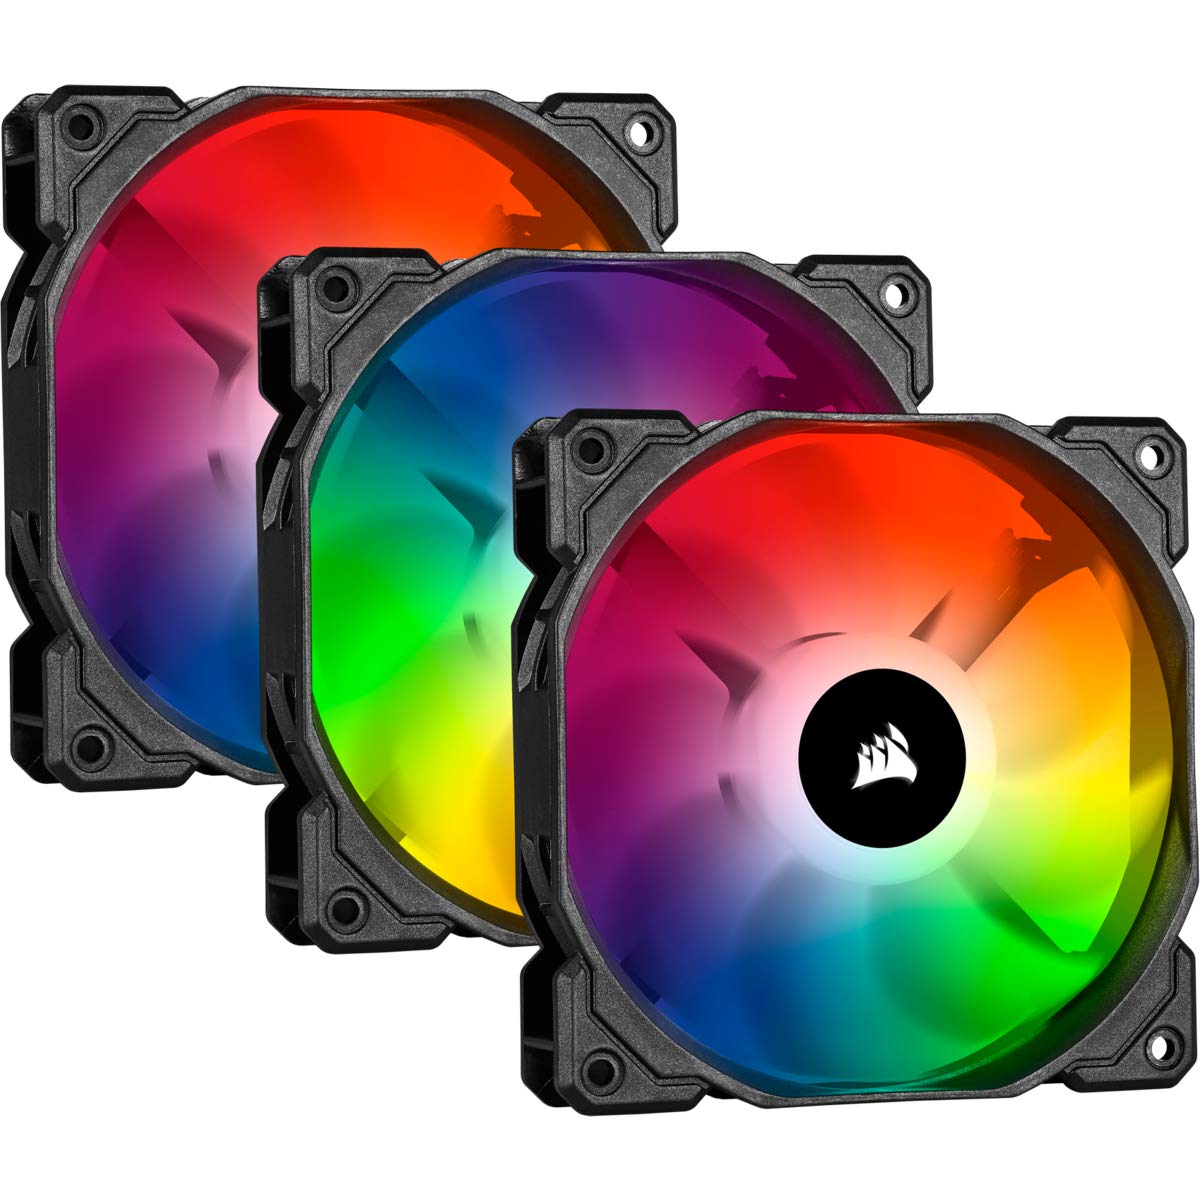 Corsair iCUE SP120 RGB Pro Performance 120mm Triple Fan Kit with Lighting Node Core - $39.99 ($79.99 - 40) - Lowest price ever Free Shipping with Prime